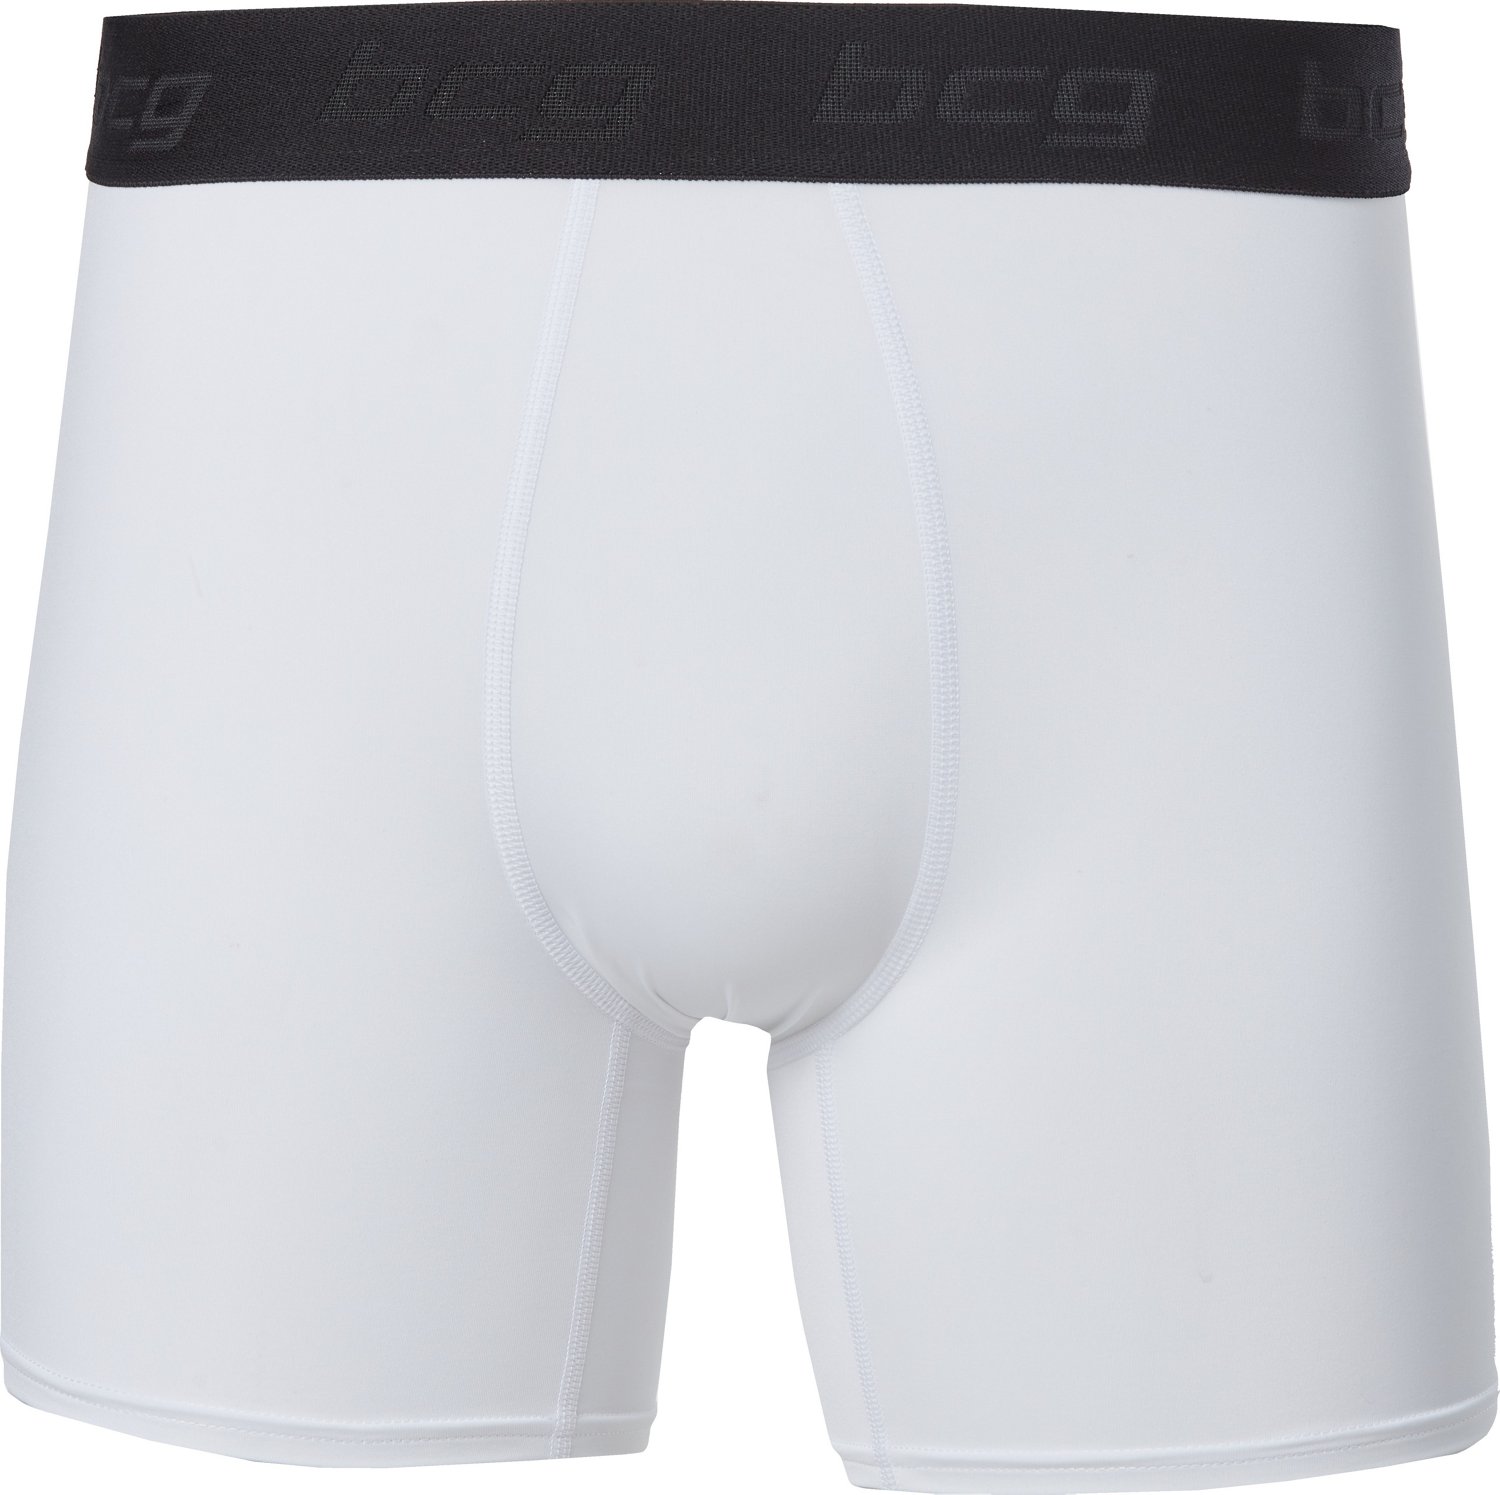 Turq Performance Underwear for Men Mens Underwear & Mens Boxer Briefs for Active Lifestyles and Sports